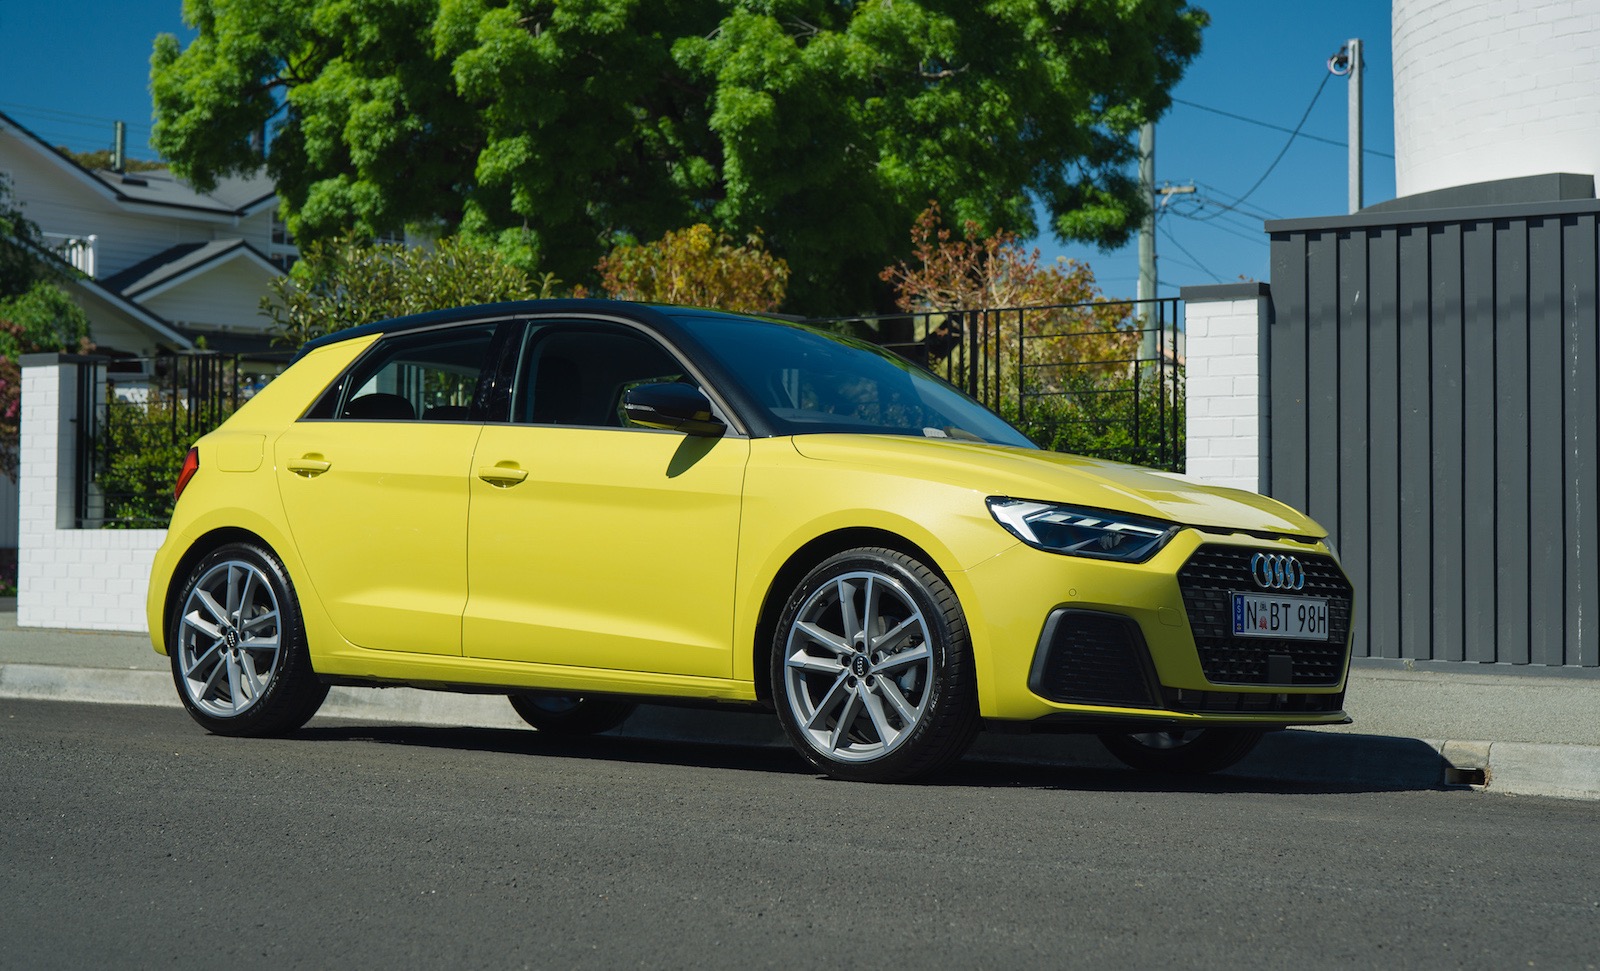 2020 Audi A1 now on sale in Australia, topped by 40 TFSI